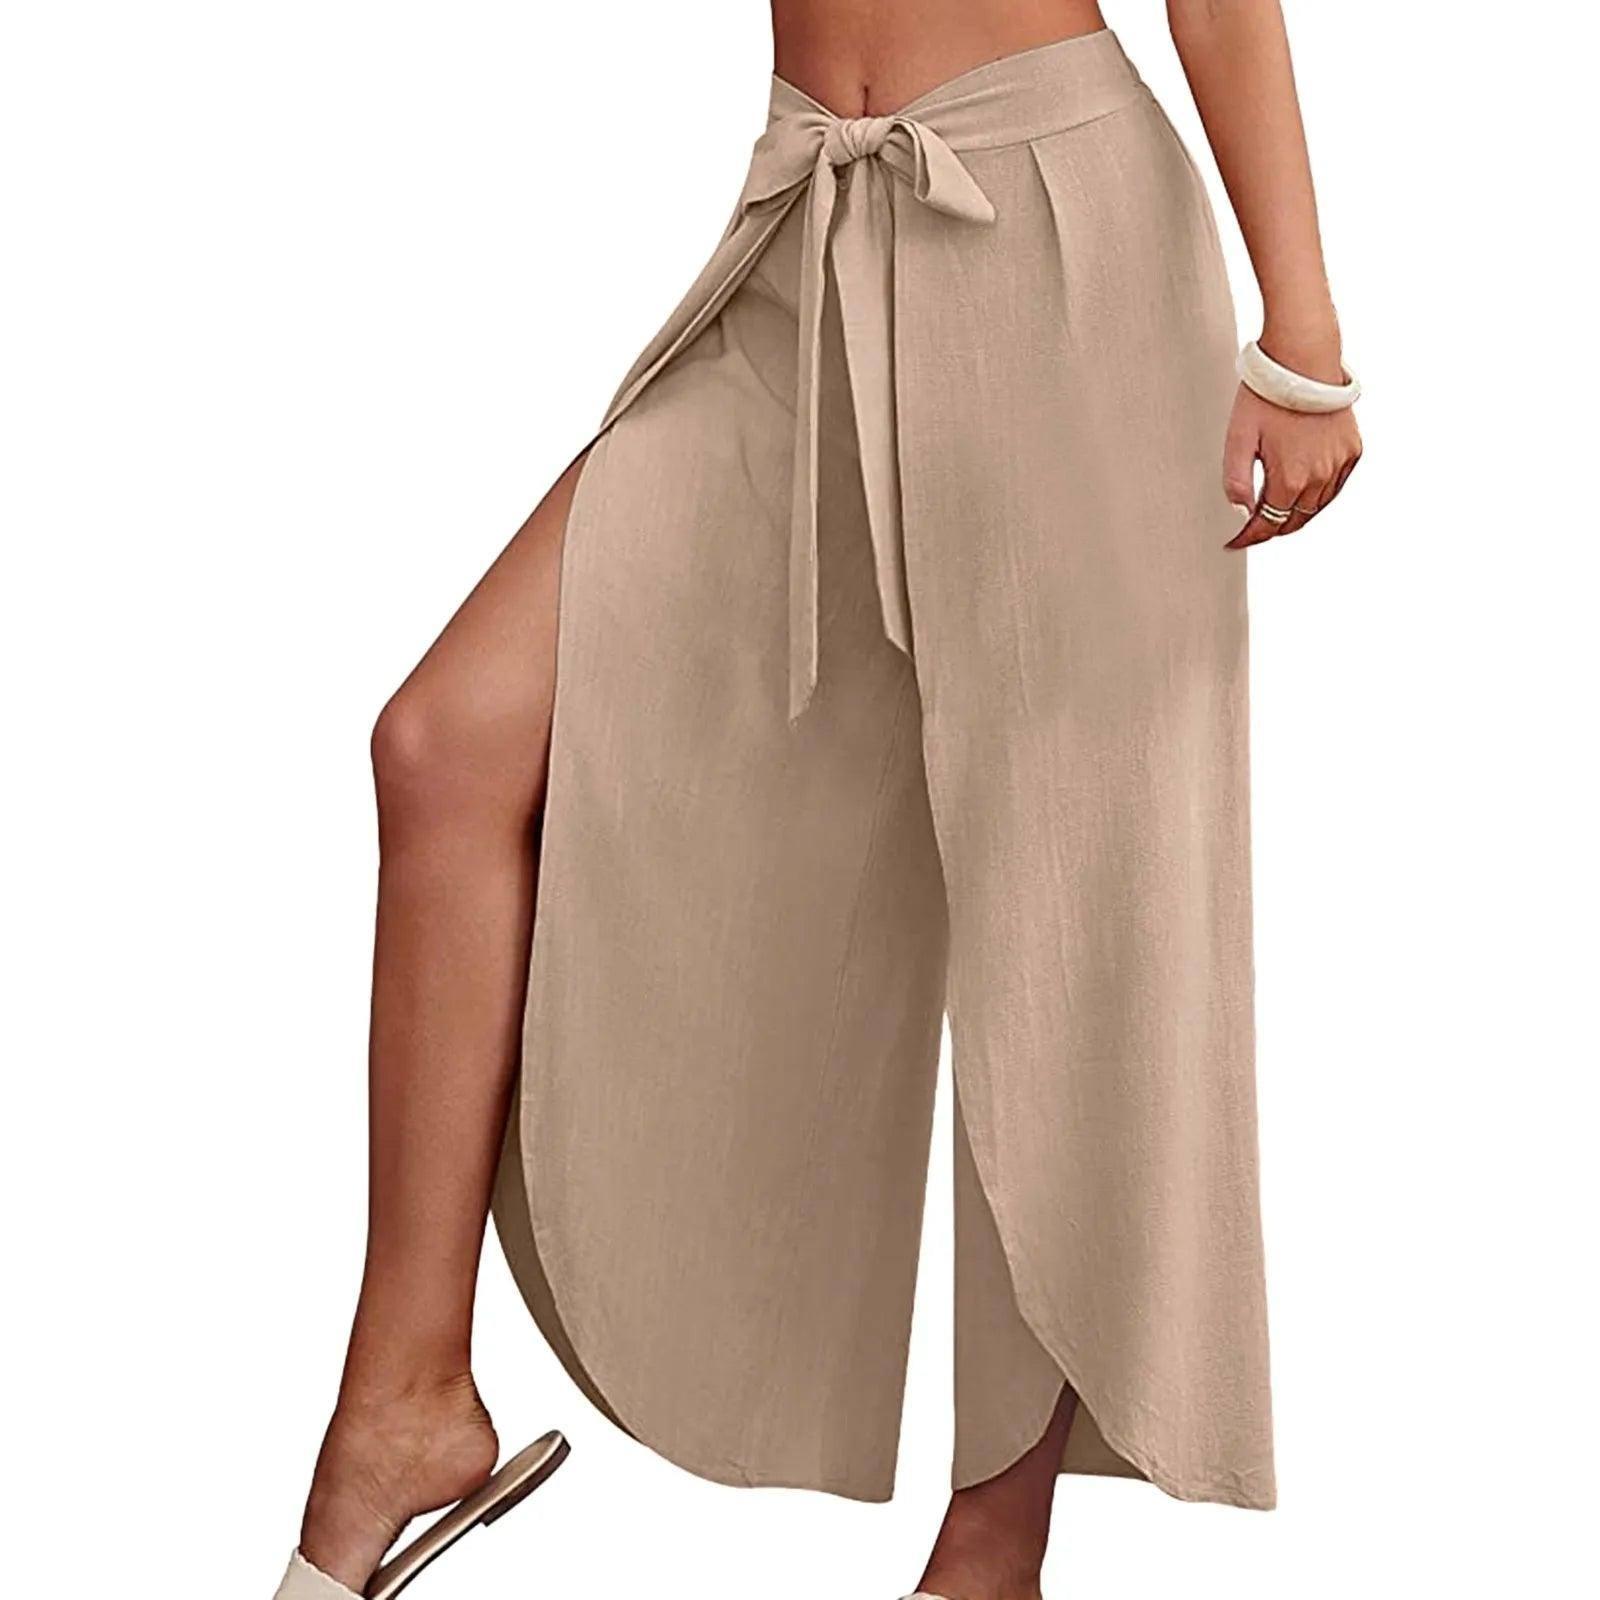 Women's Fashion Loose Casual Solid Color High Waist Flowy-Beige-7